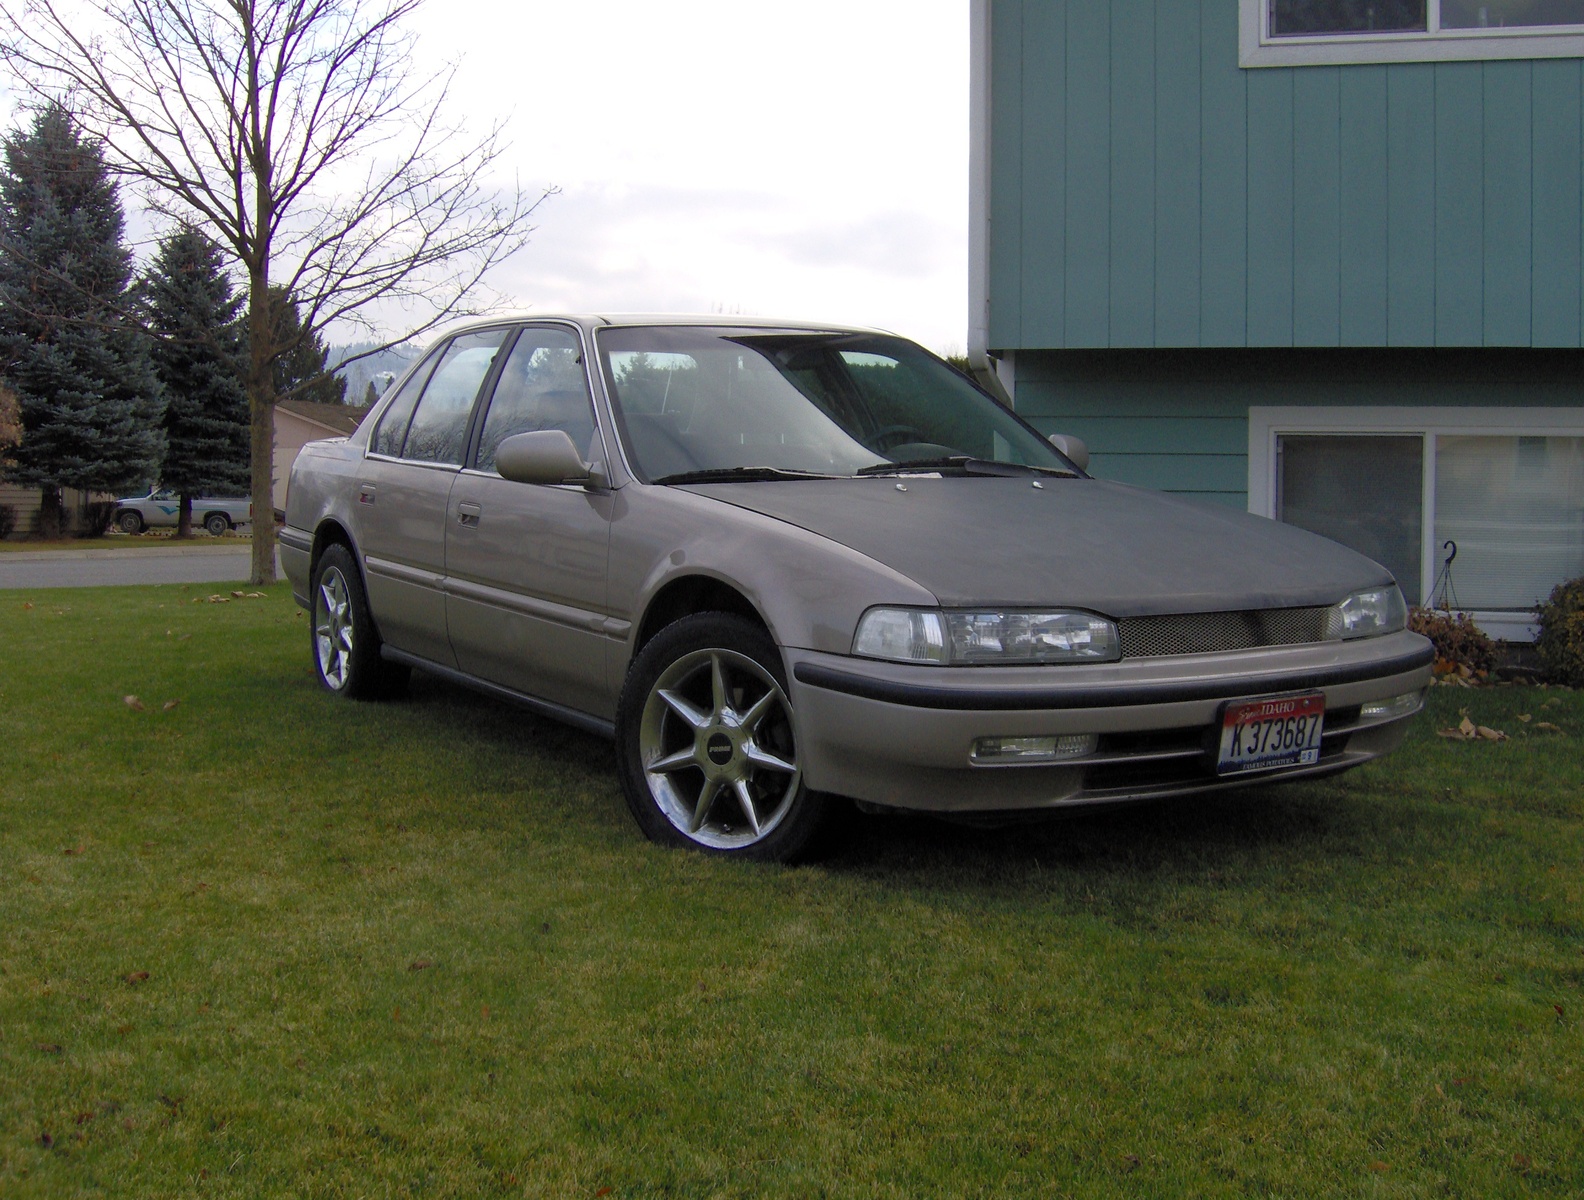 Picture of 1993 honda accord #4